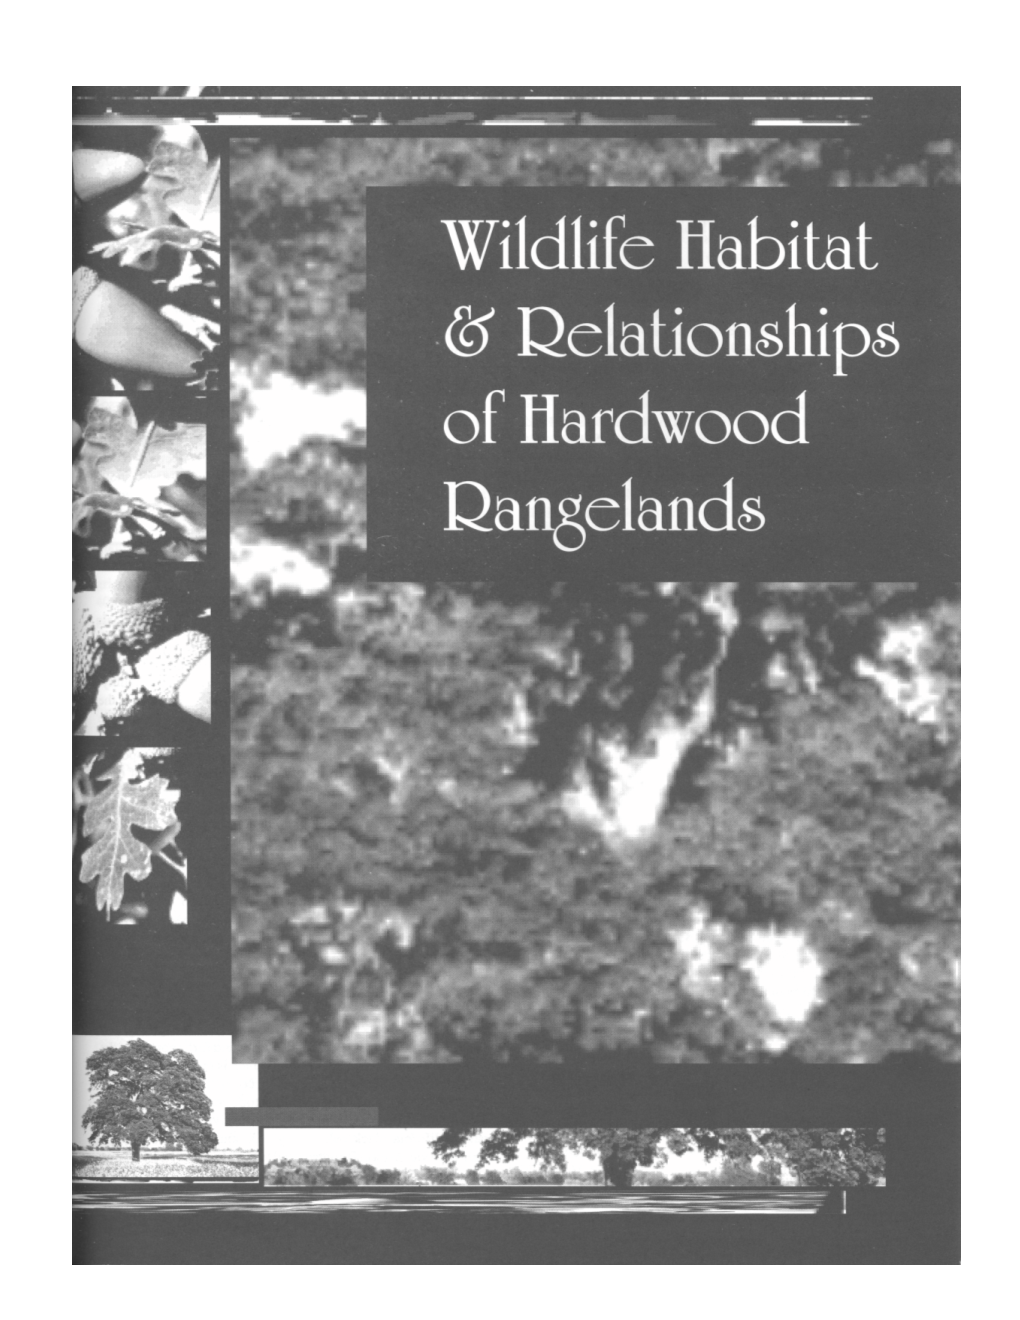 Influence of Scale on the Management of Wildlife in California Oak Woodlands1